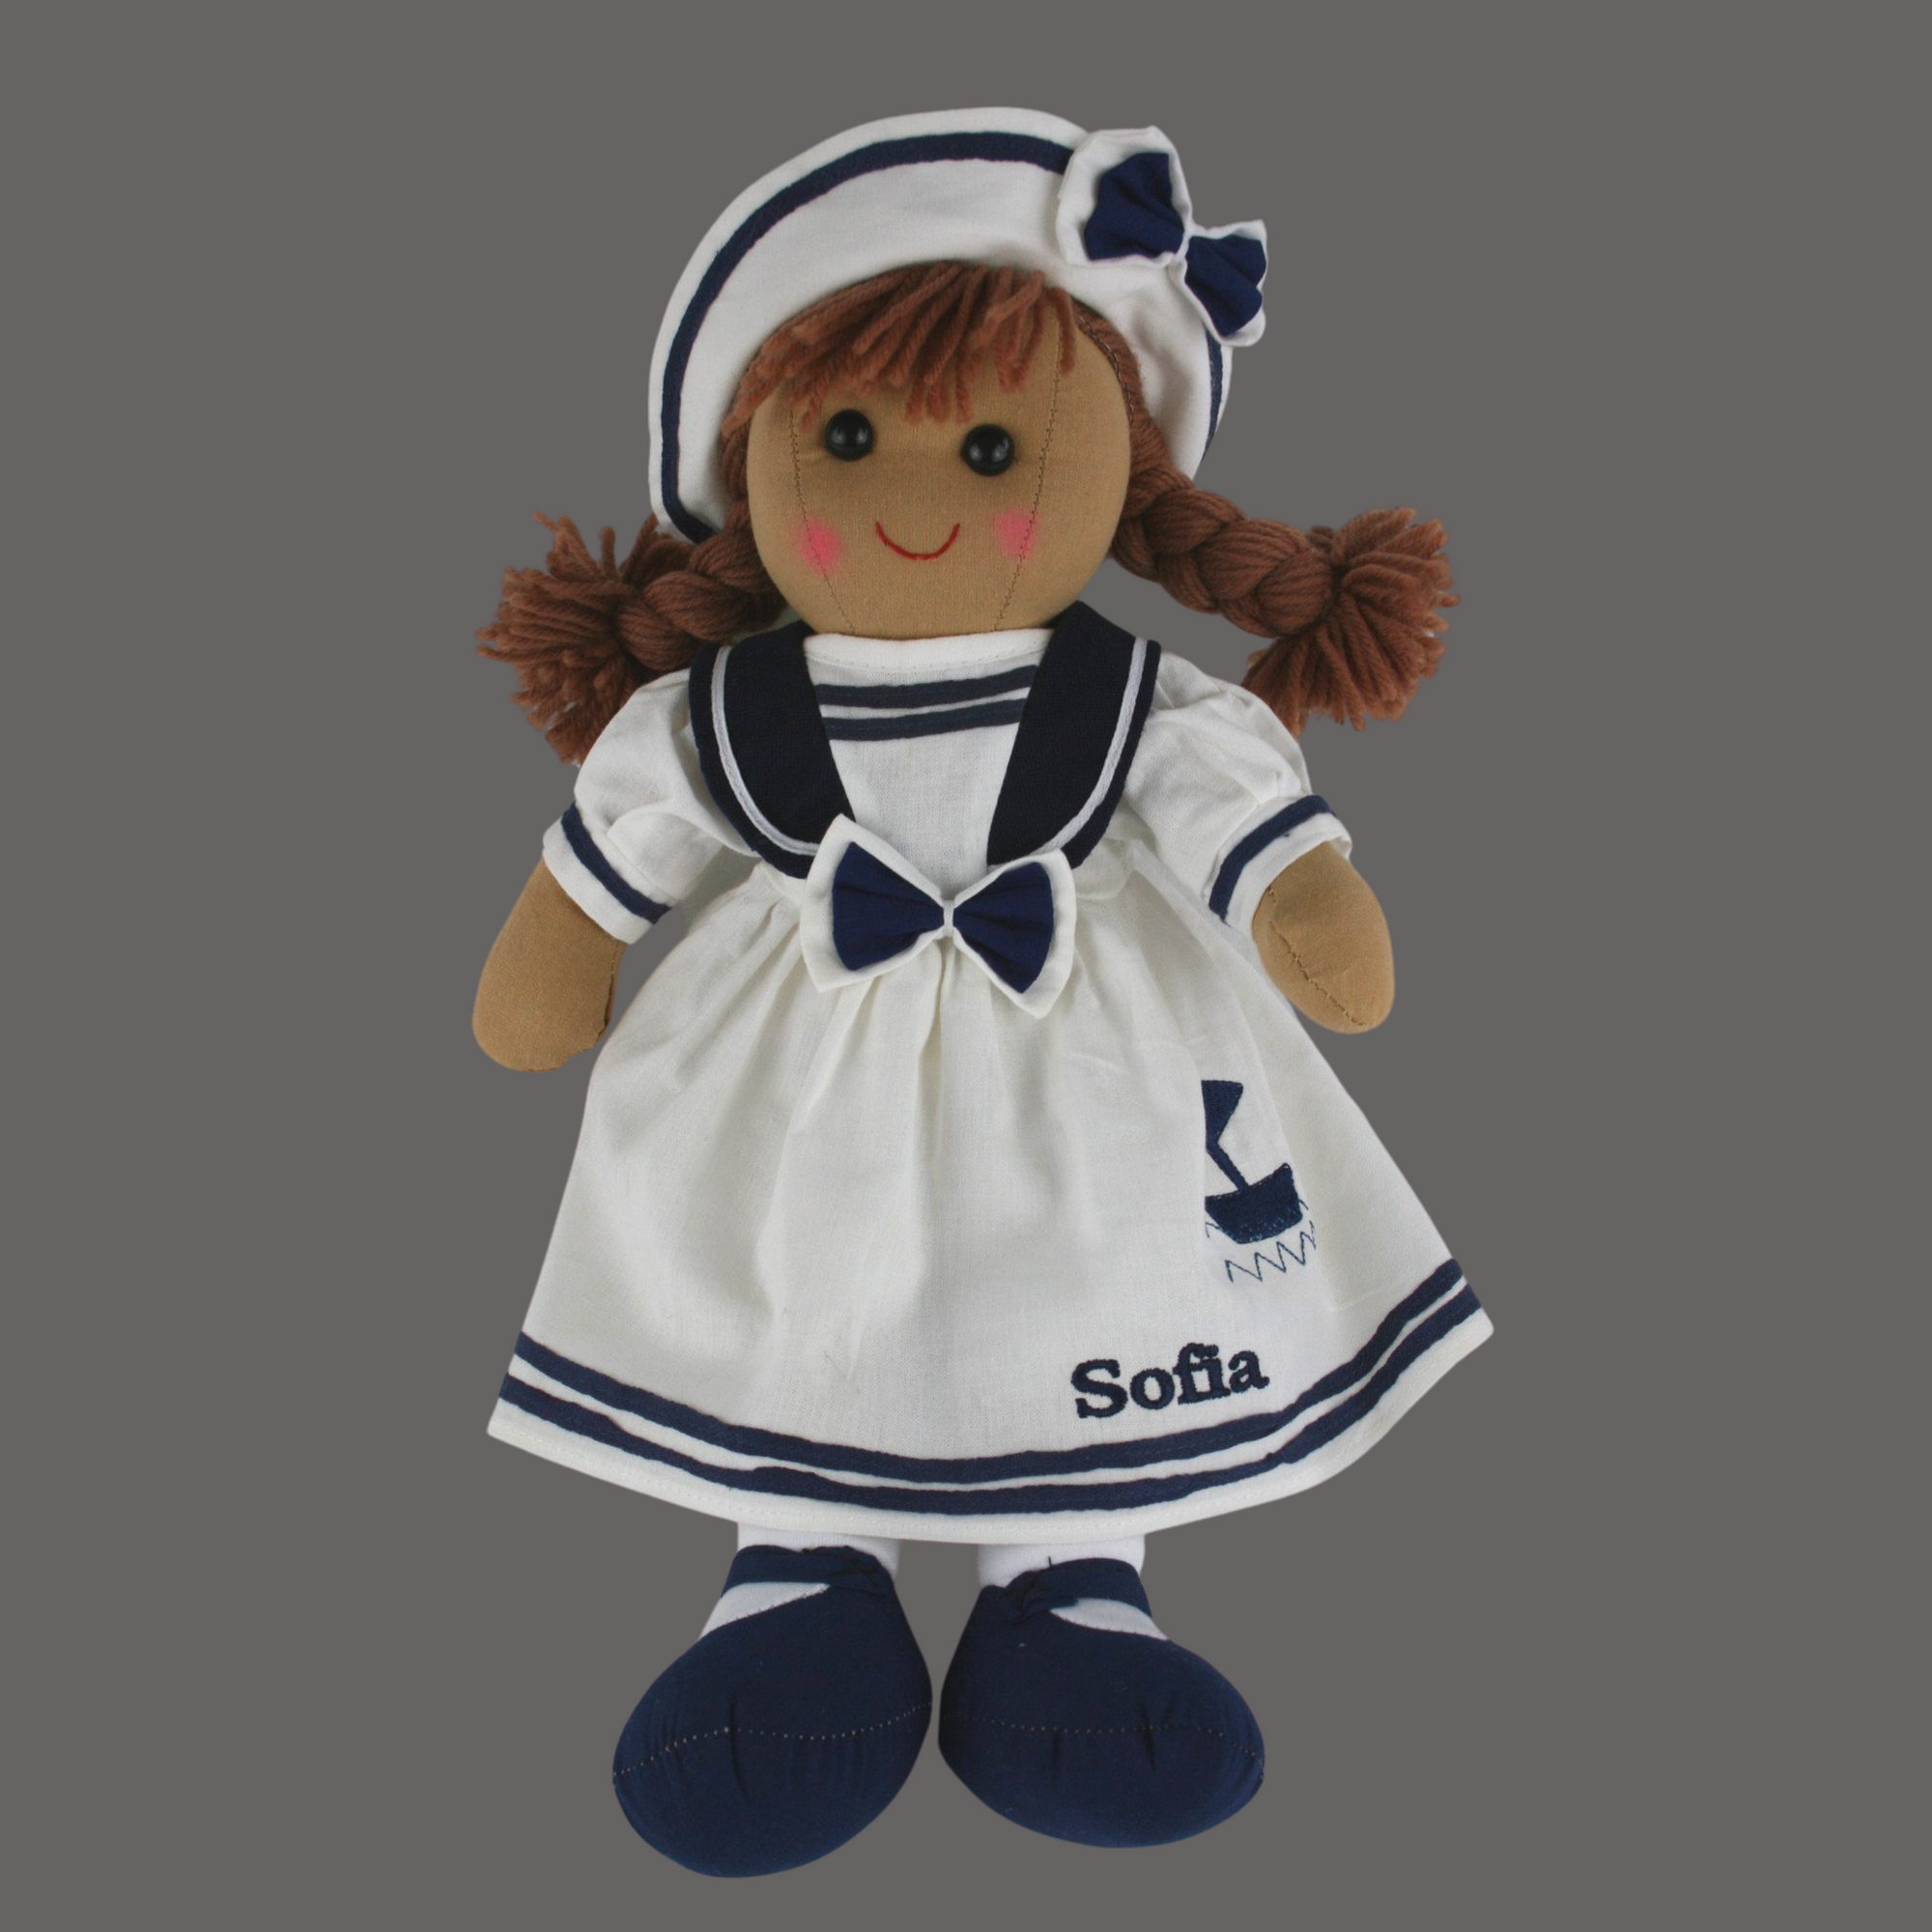 Personalised rag doll in a white dress with blue trim and a white and blue hat. The dress can be personalised with a name of your choice. Suitable for all ages of children.